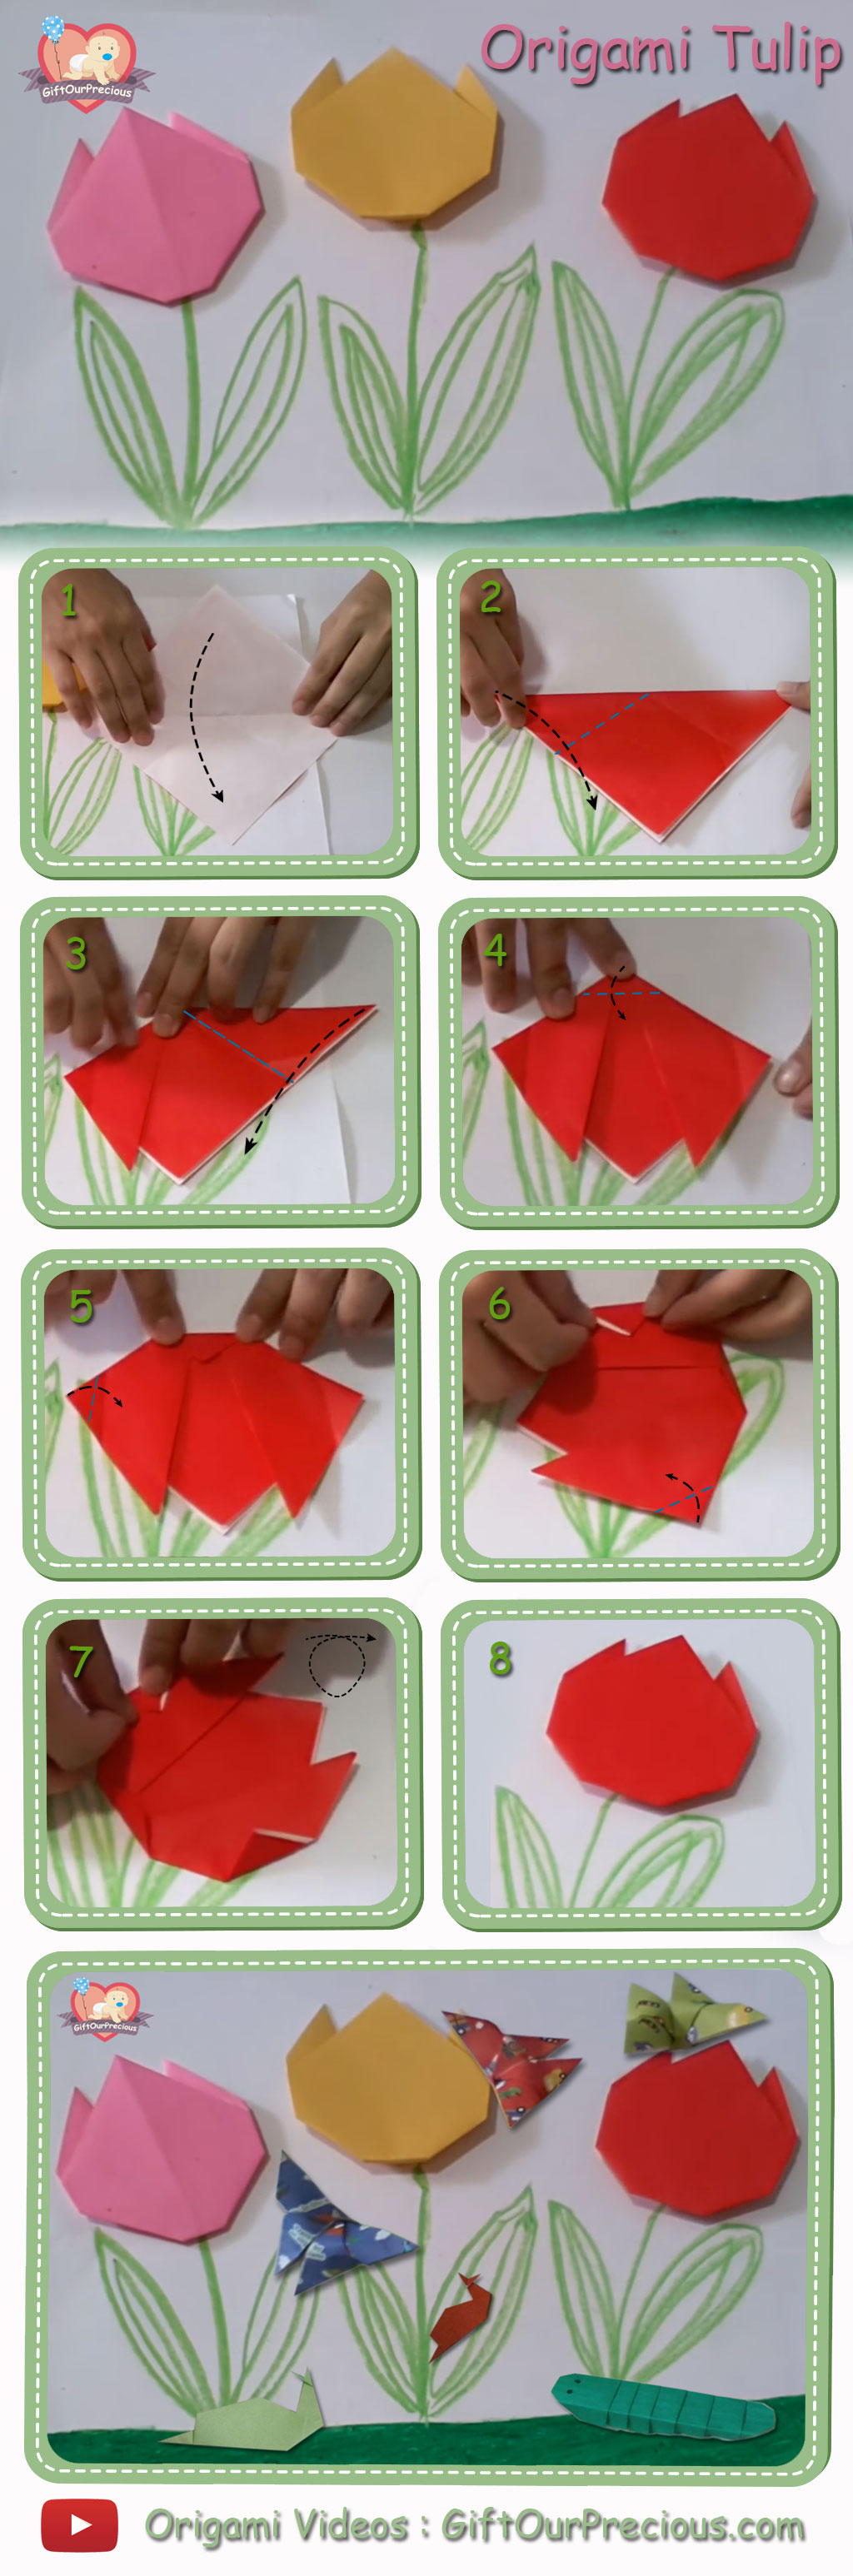 How To Make A Flower Origami Step By Step Origami Tulip Flowers Step Step Instruction Gift Our Precious